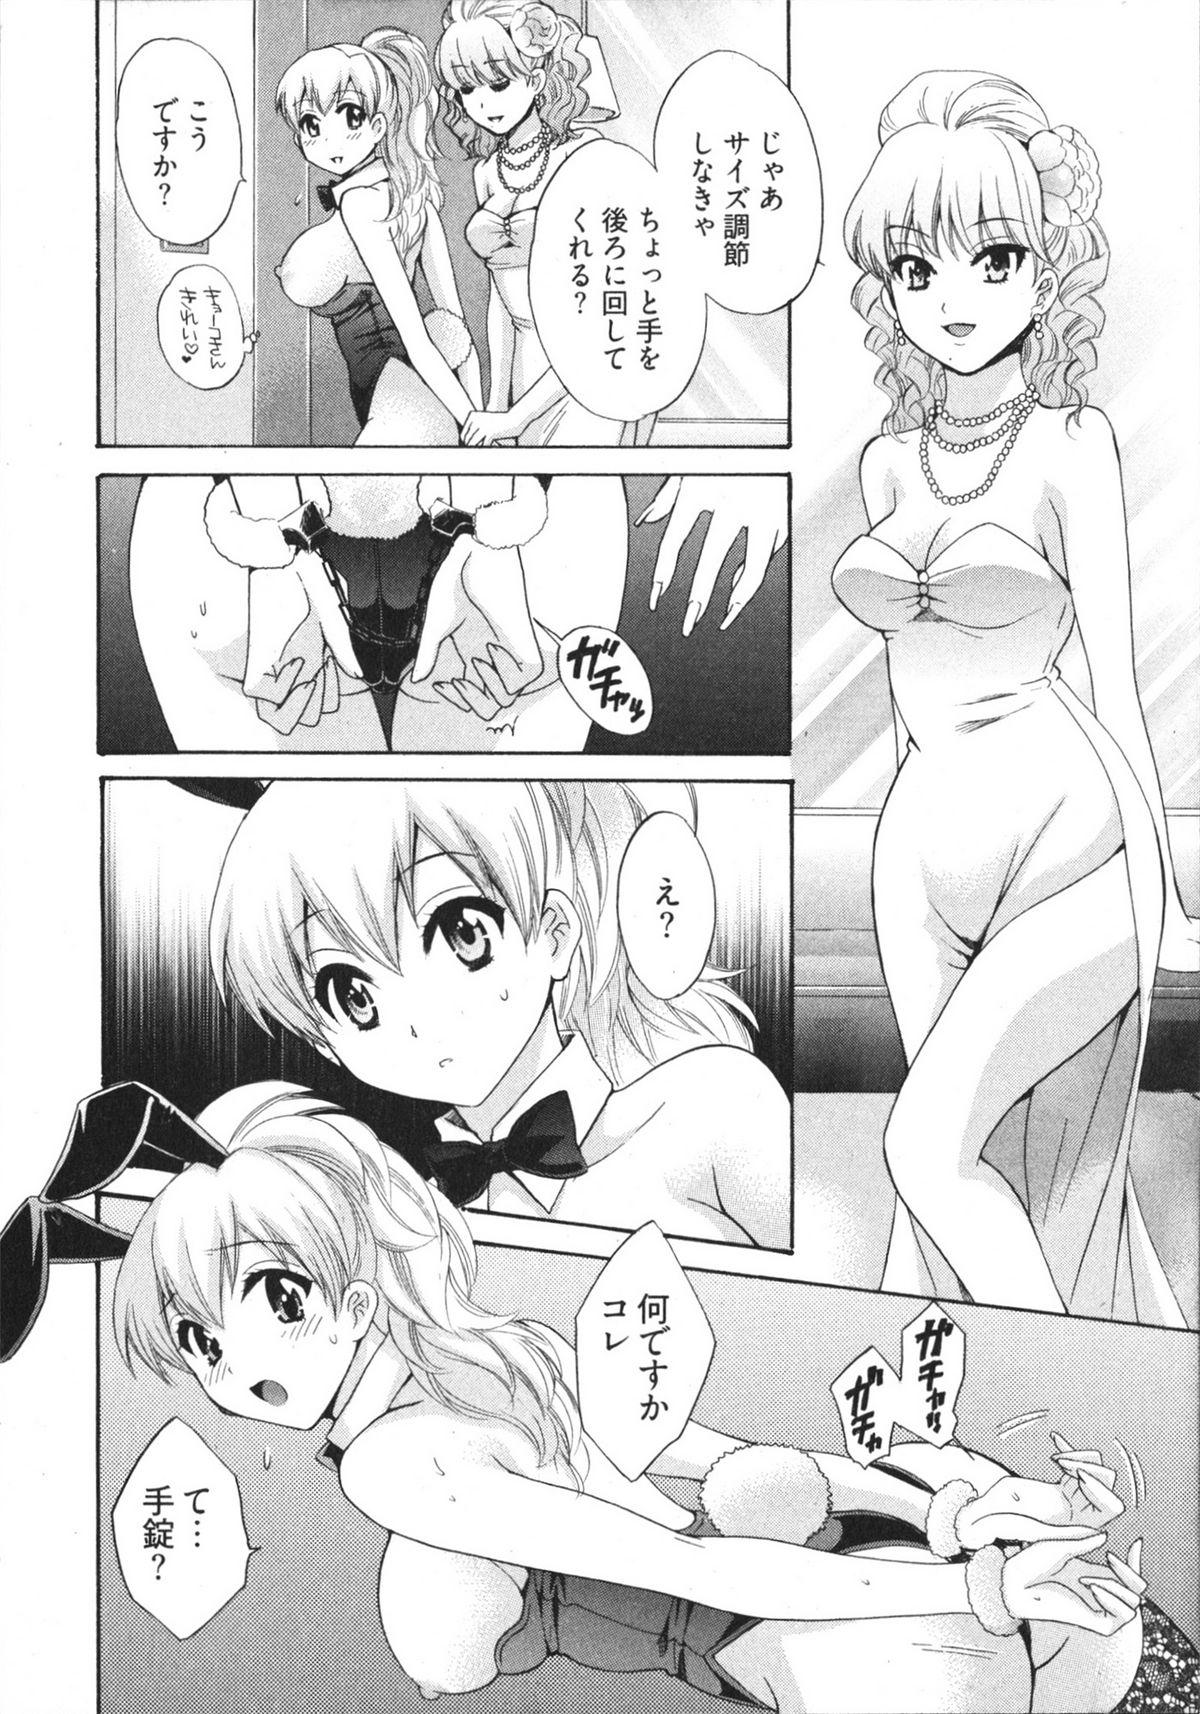 Lick Tenshi no Marshmallow 4 Spreading - Page 10